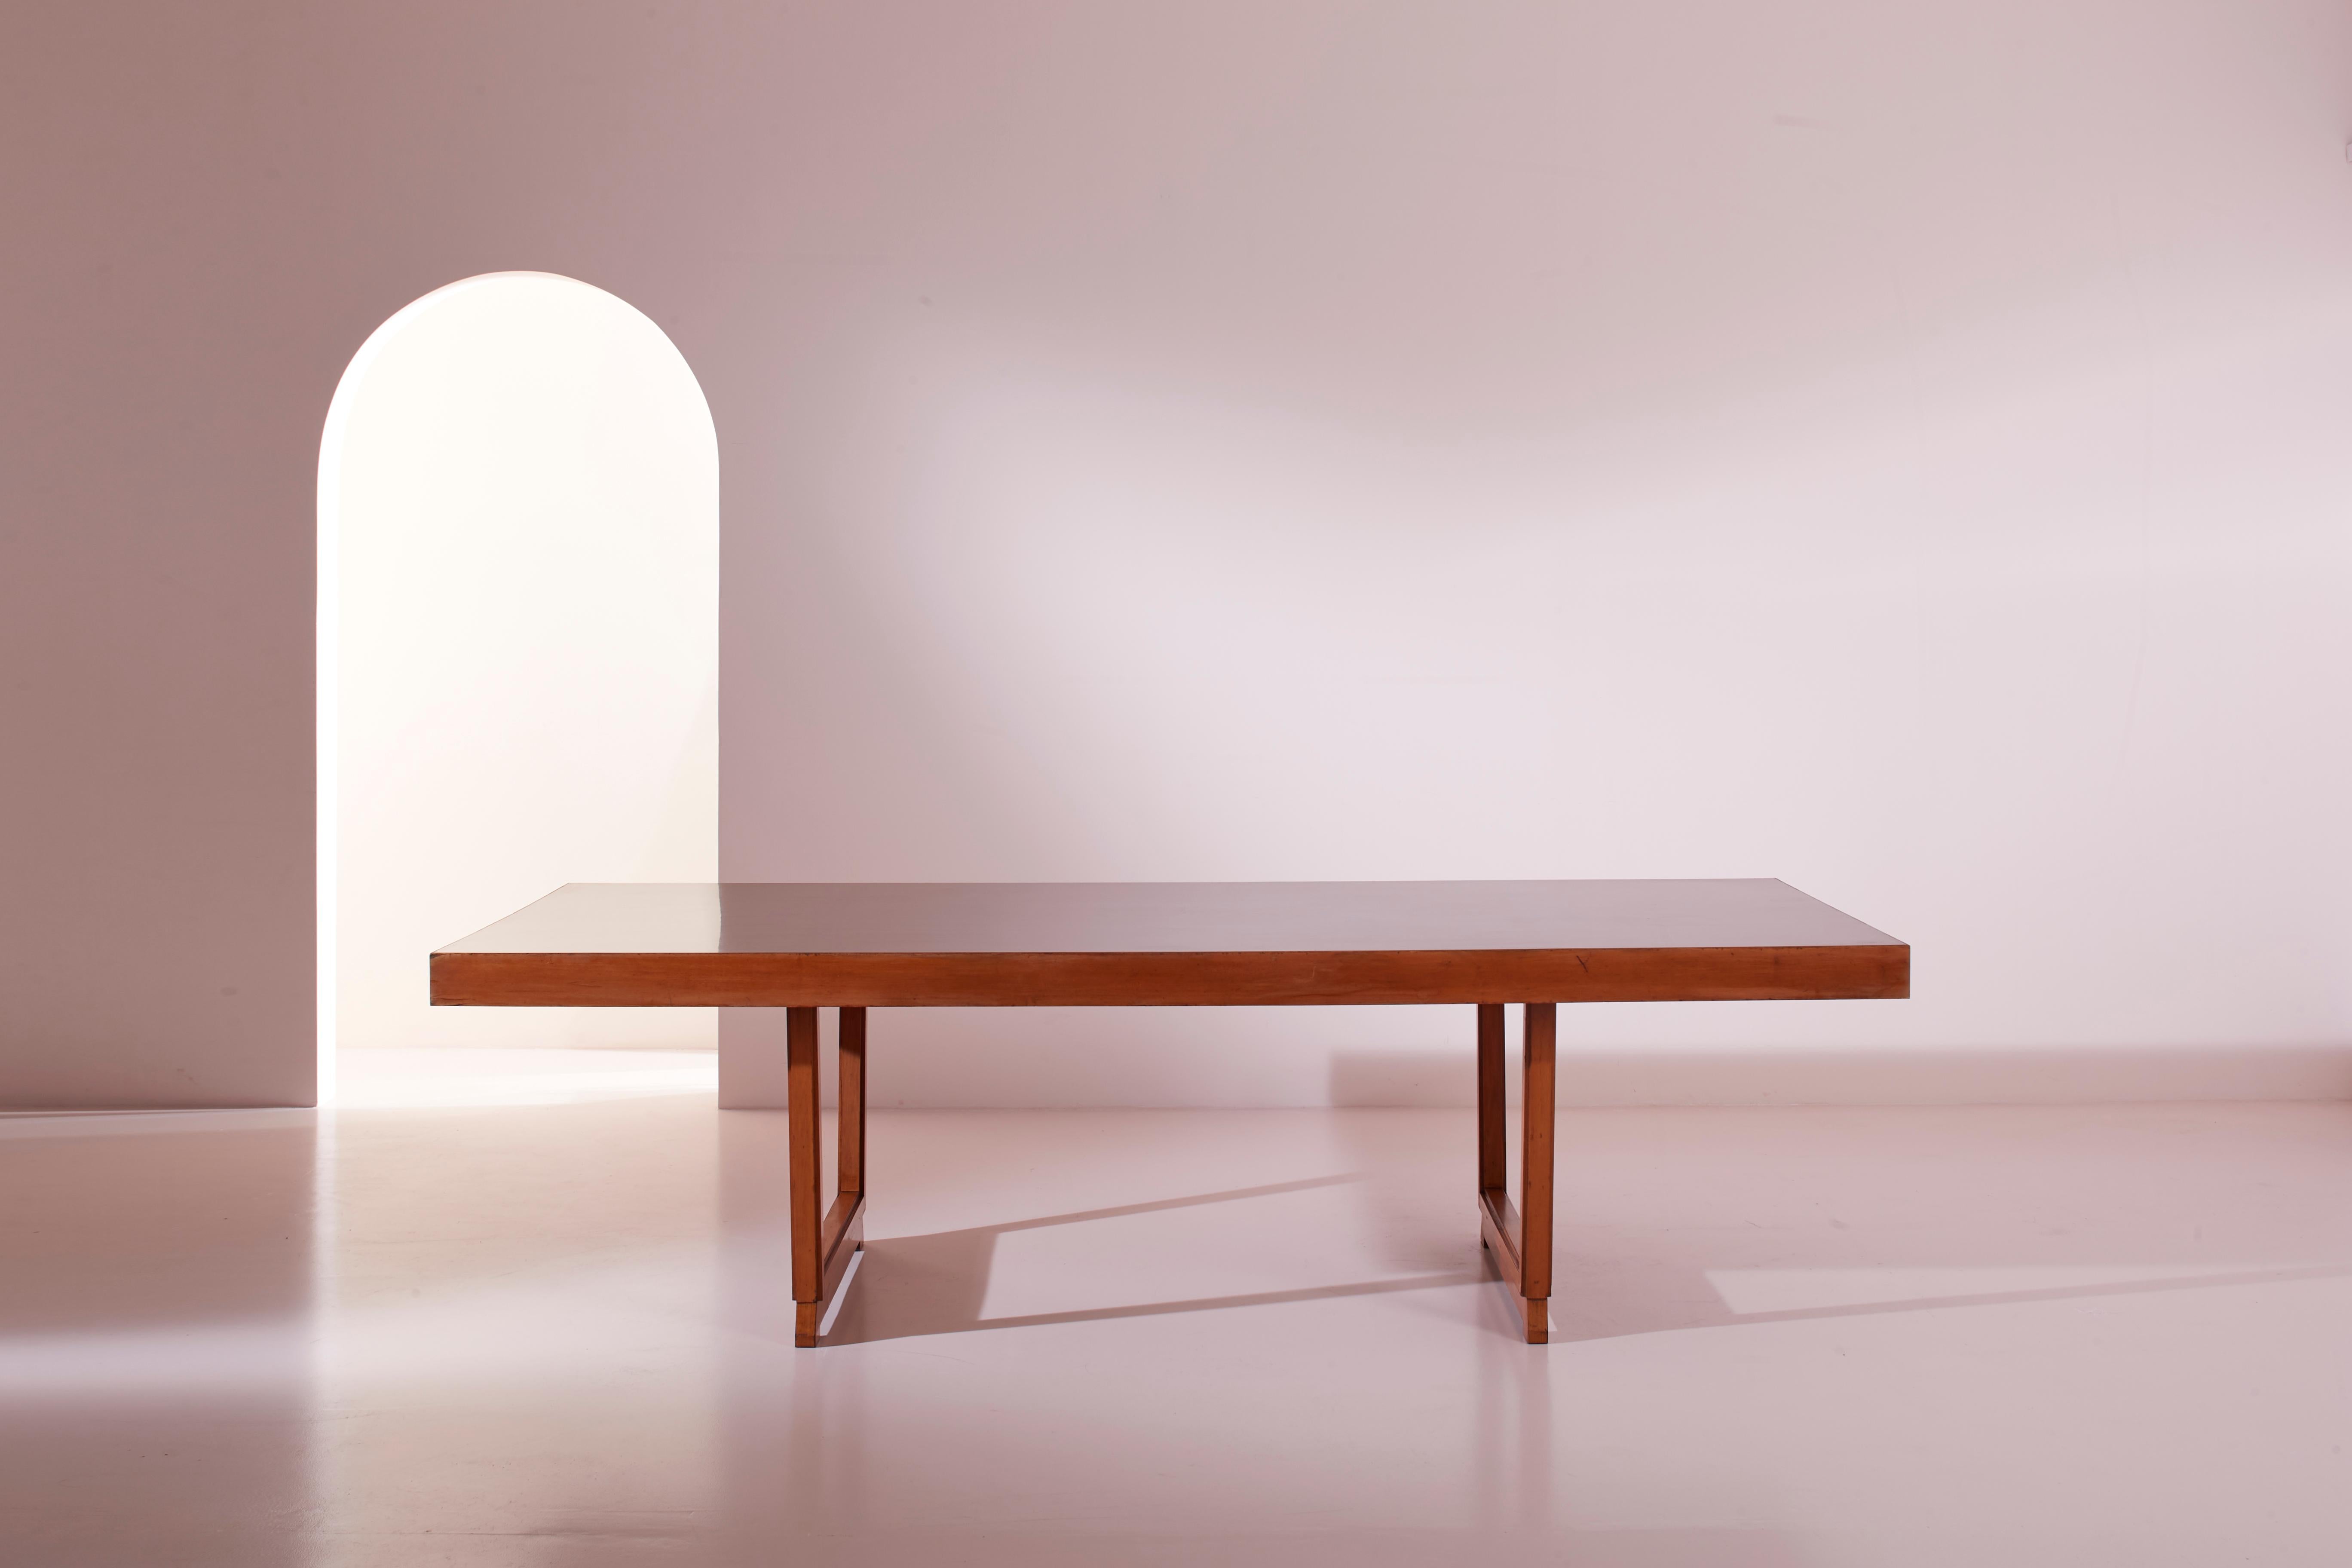 A large table, produced in Italy during the Sixties, crafted from wood and Formica, is perfect for furnishing a conference room, a spacious dining area, or any setting where socializing requires ample space to accommodate a large number of